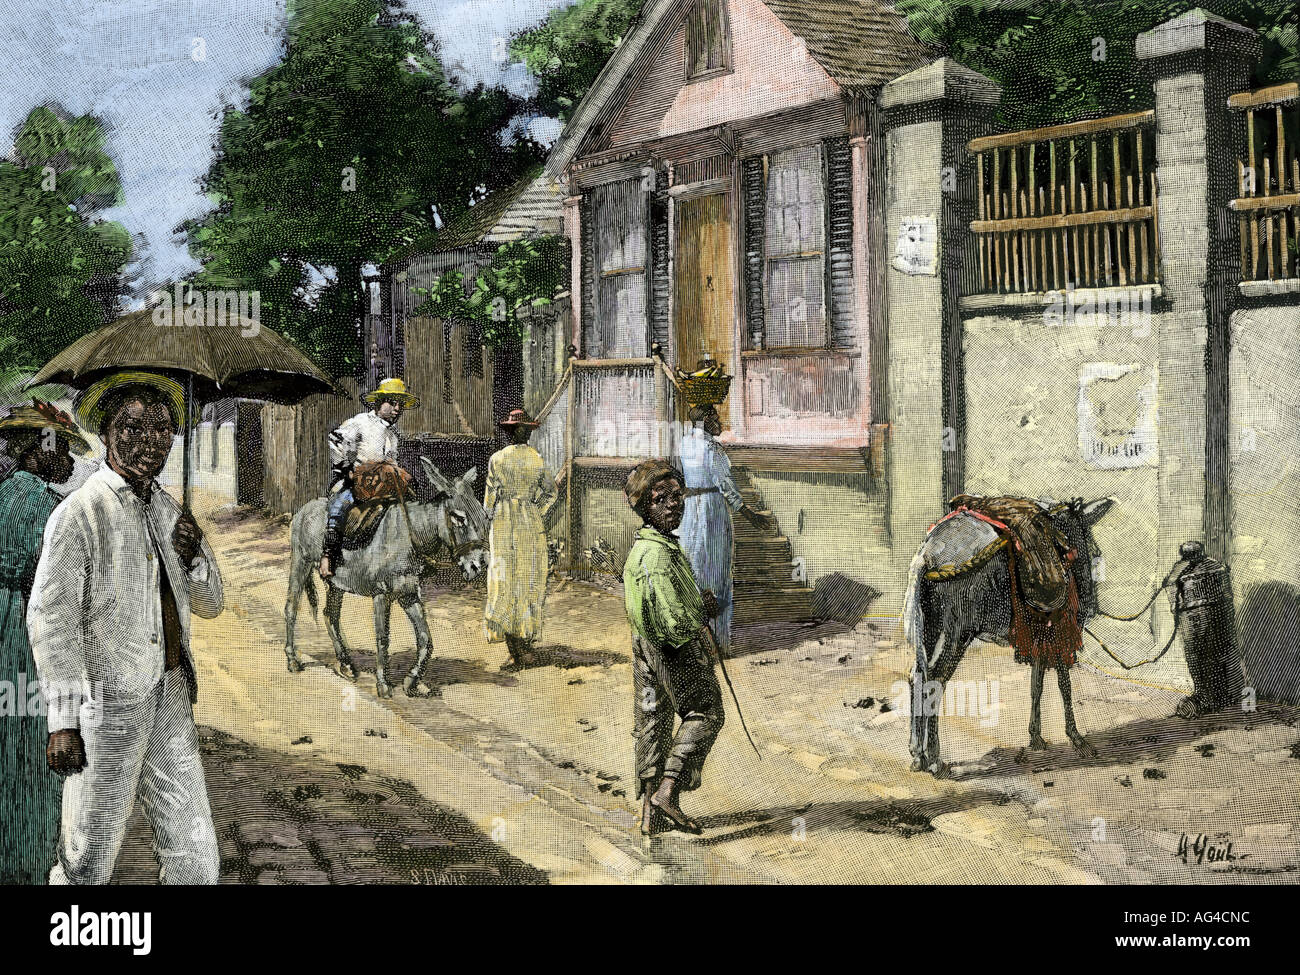 Townspeople on a Jamaica street 1890s. Hand-colored halftone of an illustration Stock Photo